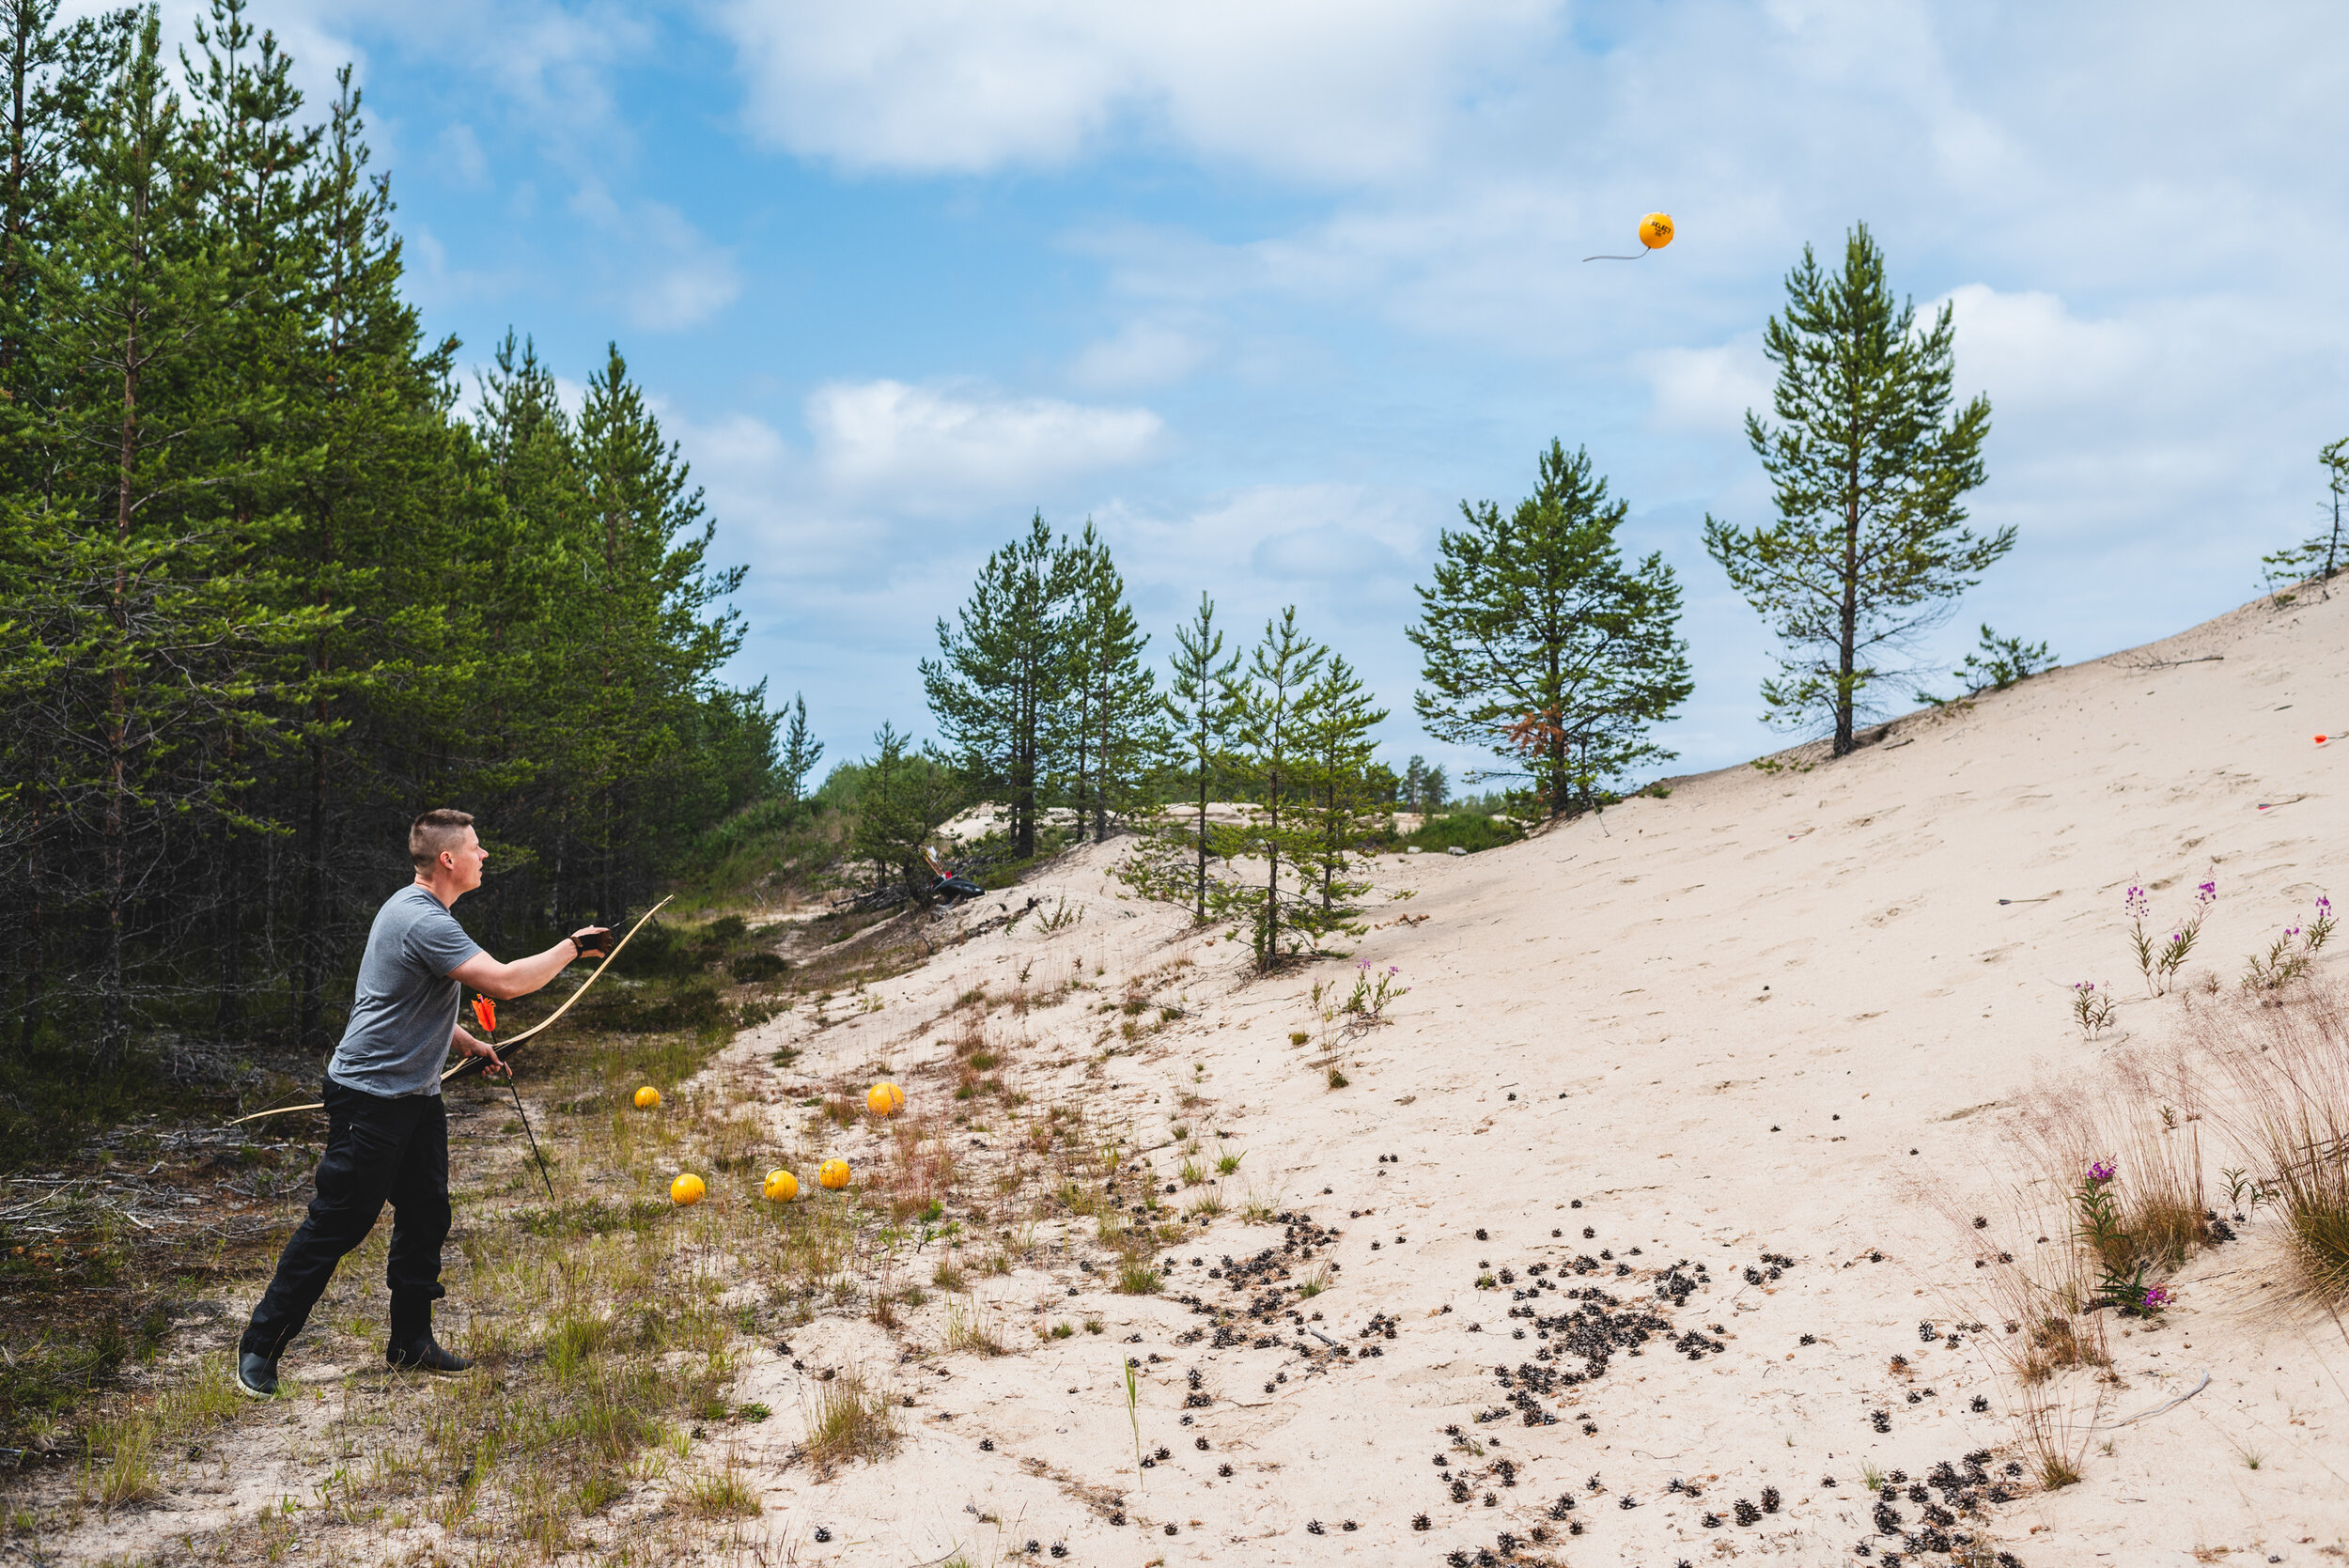  Haukipudas, Oulu 2019. A man was training hunting with a bow and arrow. He threw balls onto a gravel pit slope and tried to hit moving targets. 